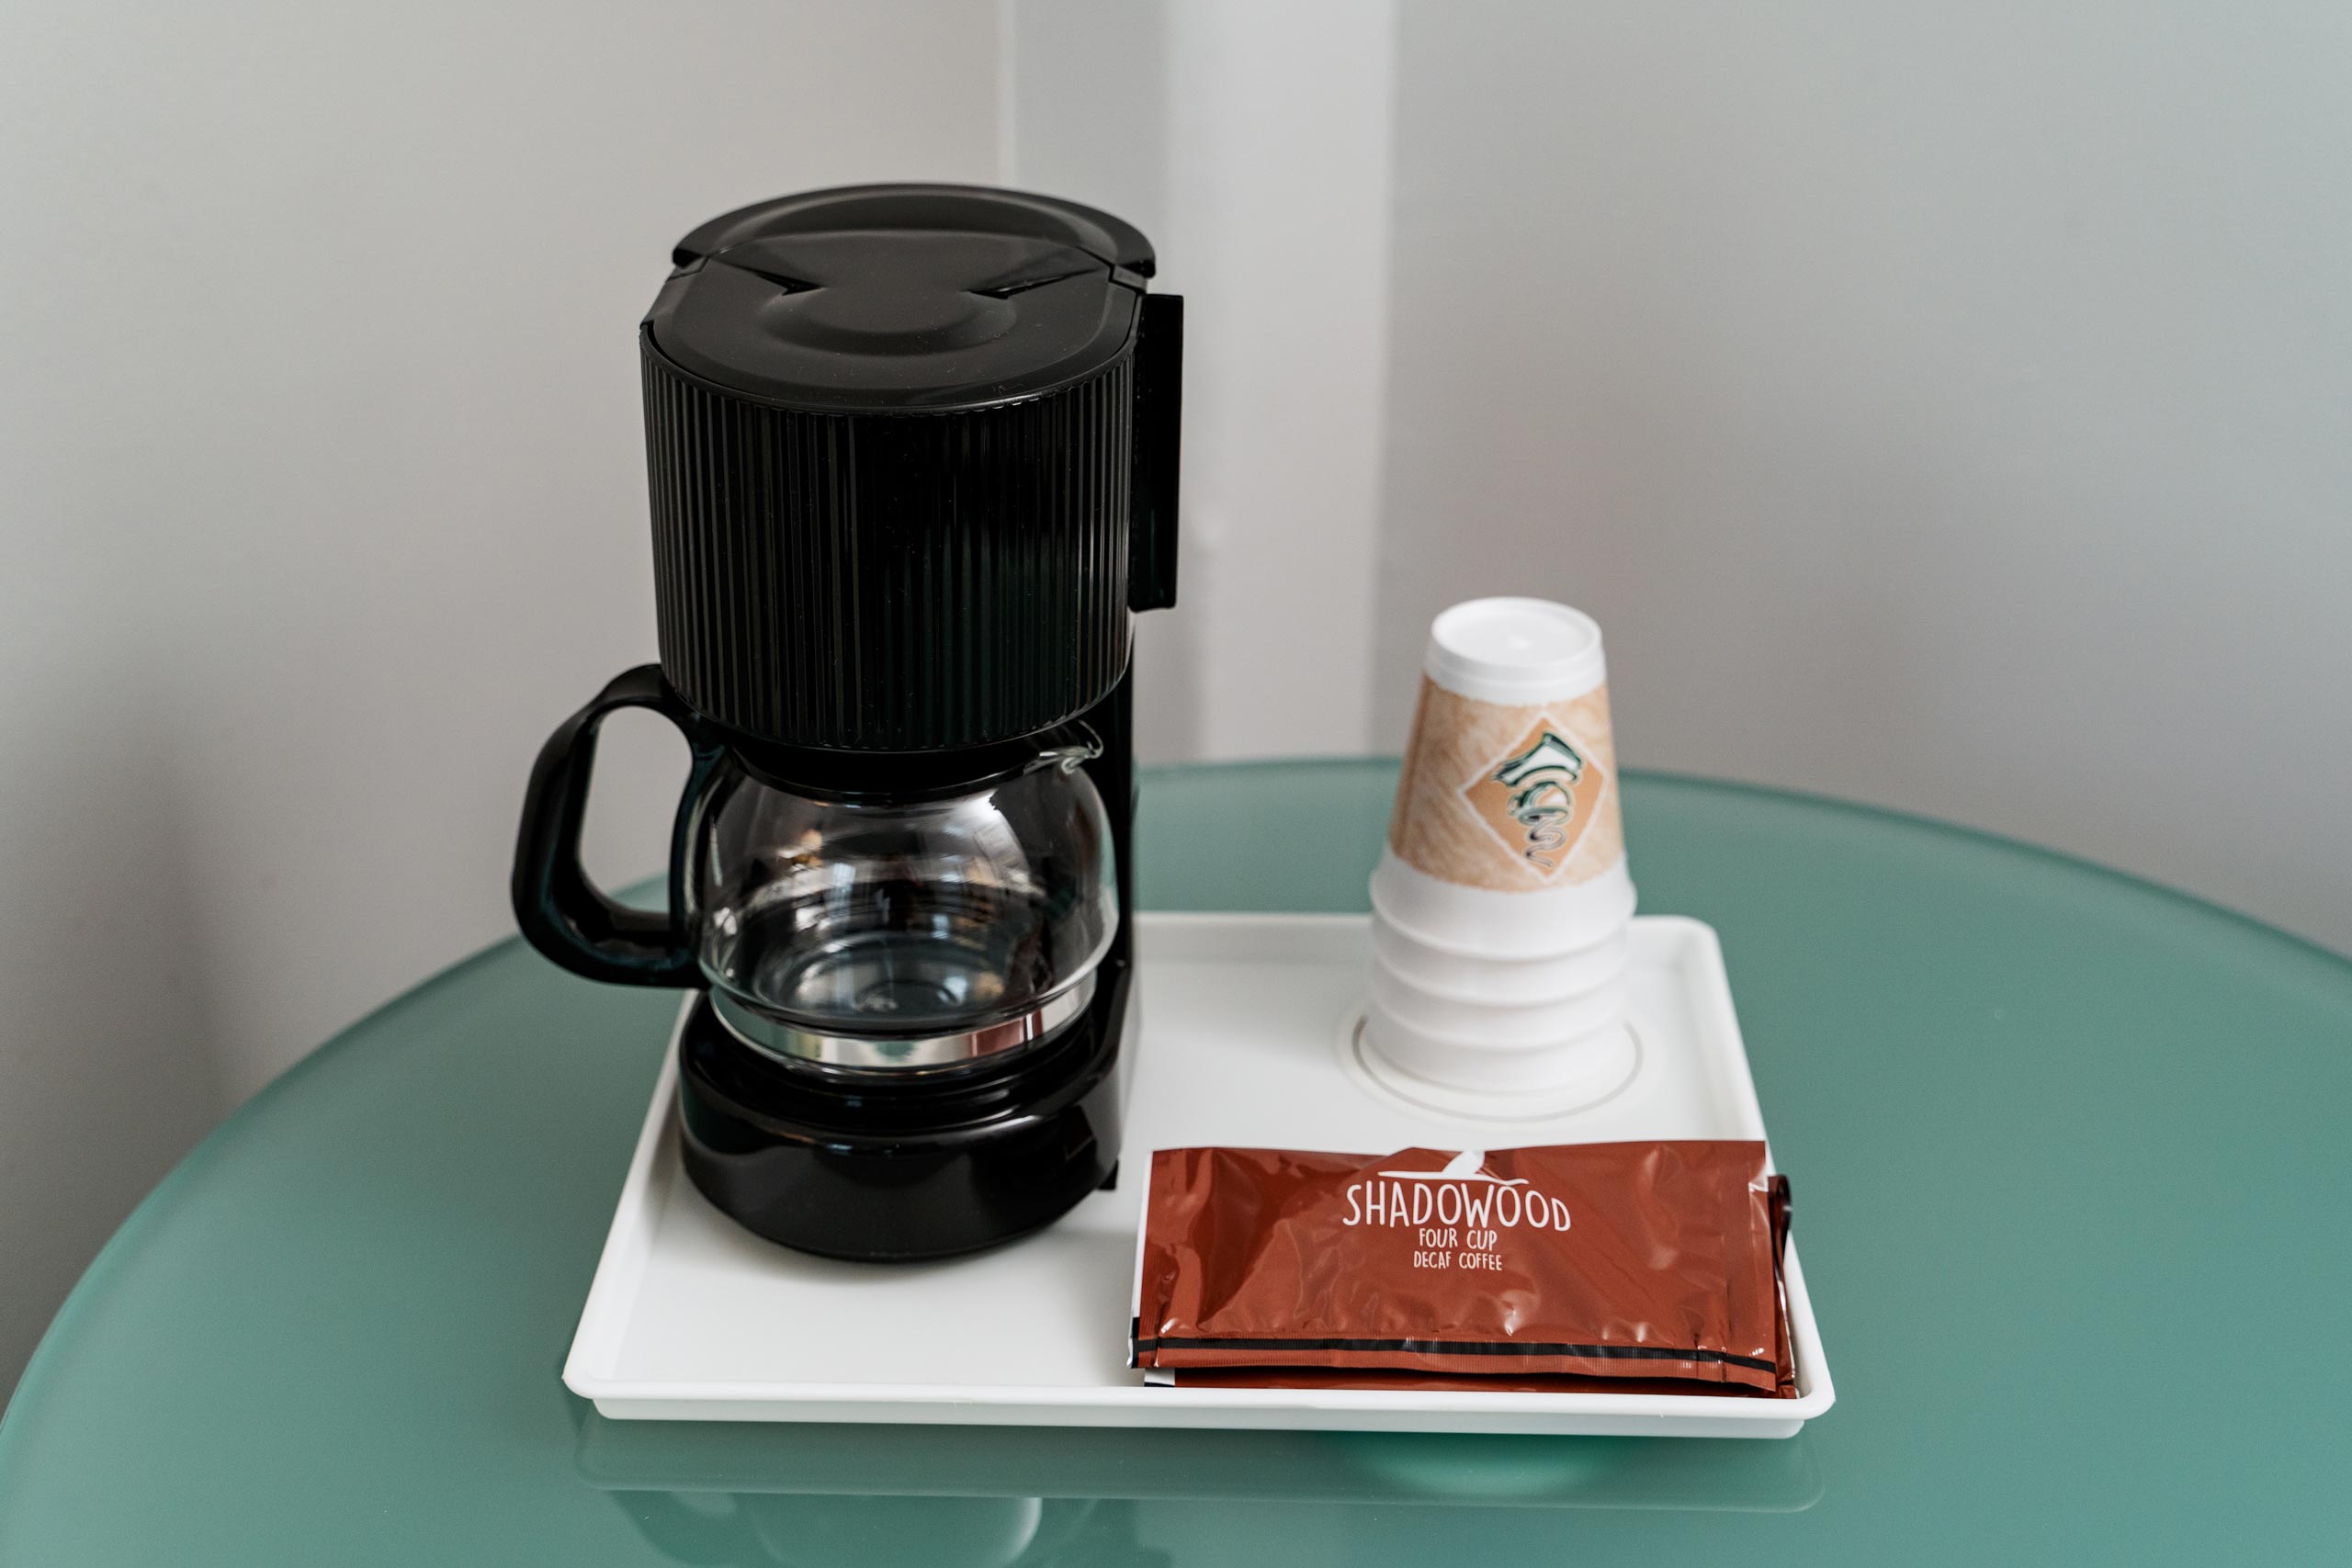 Coffee maker and disposable cups